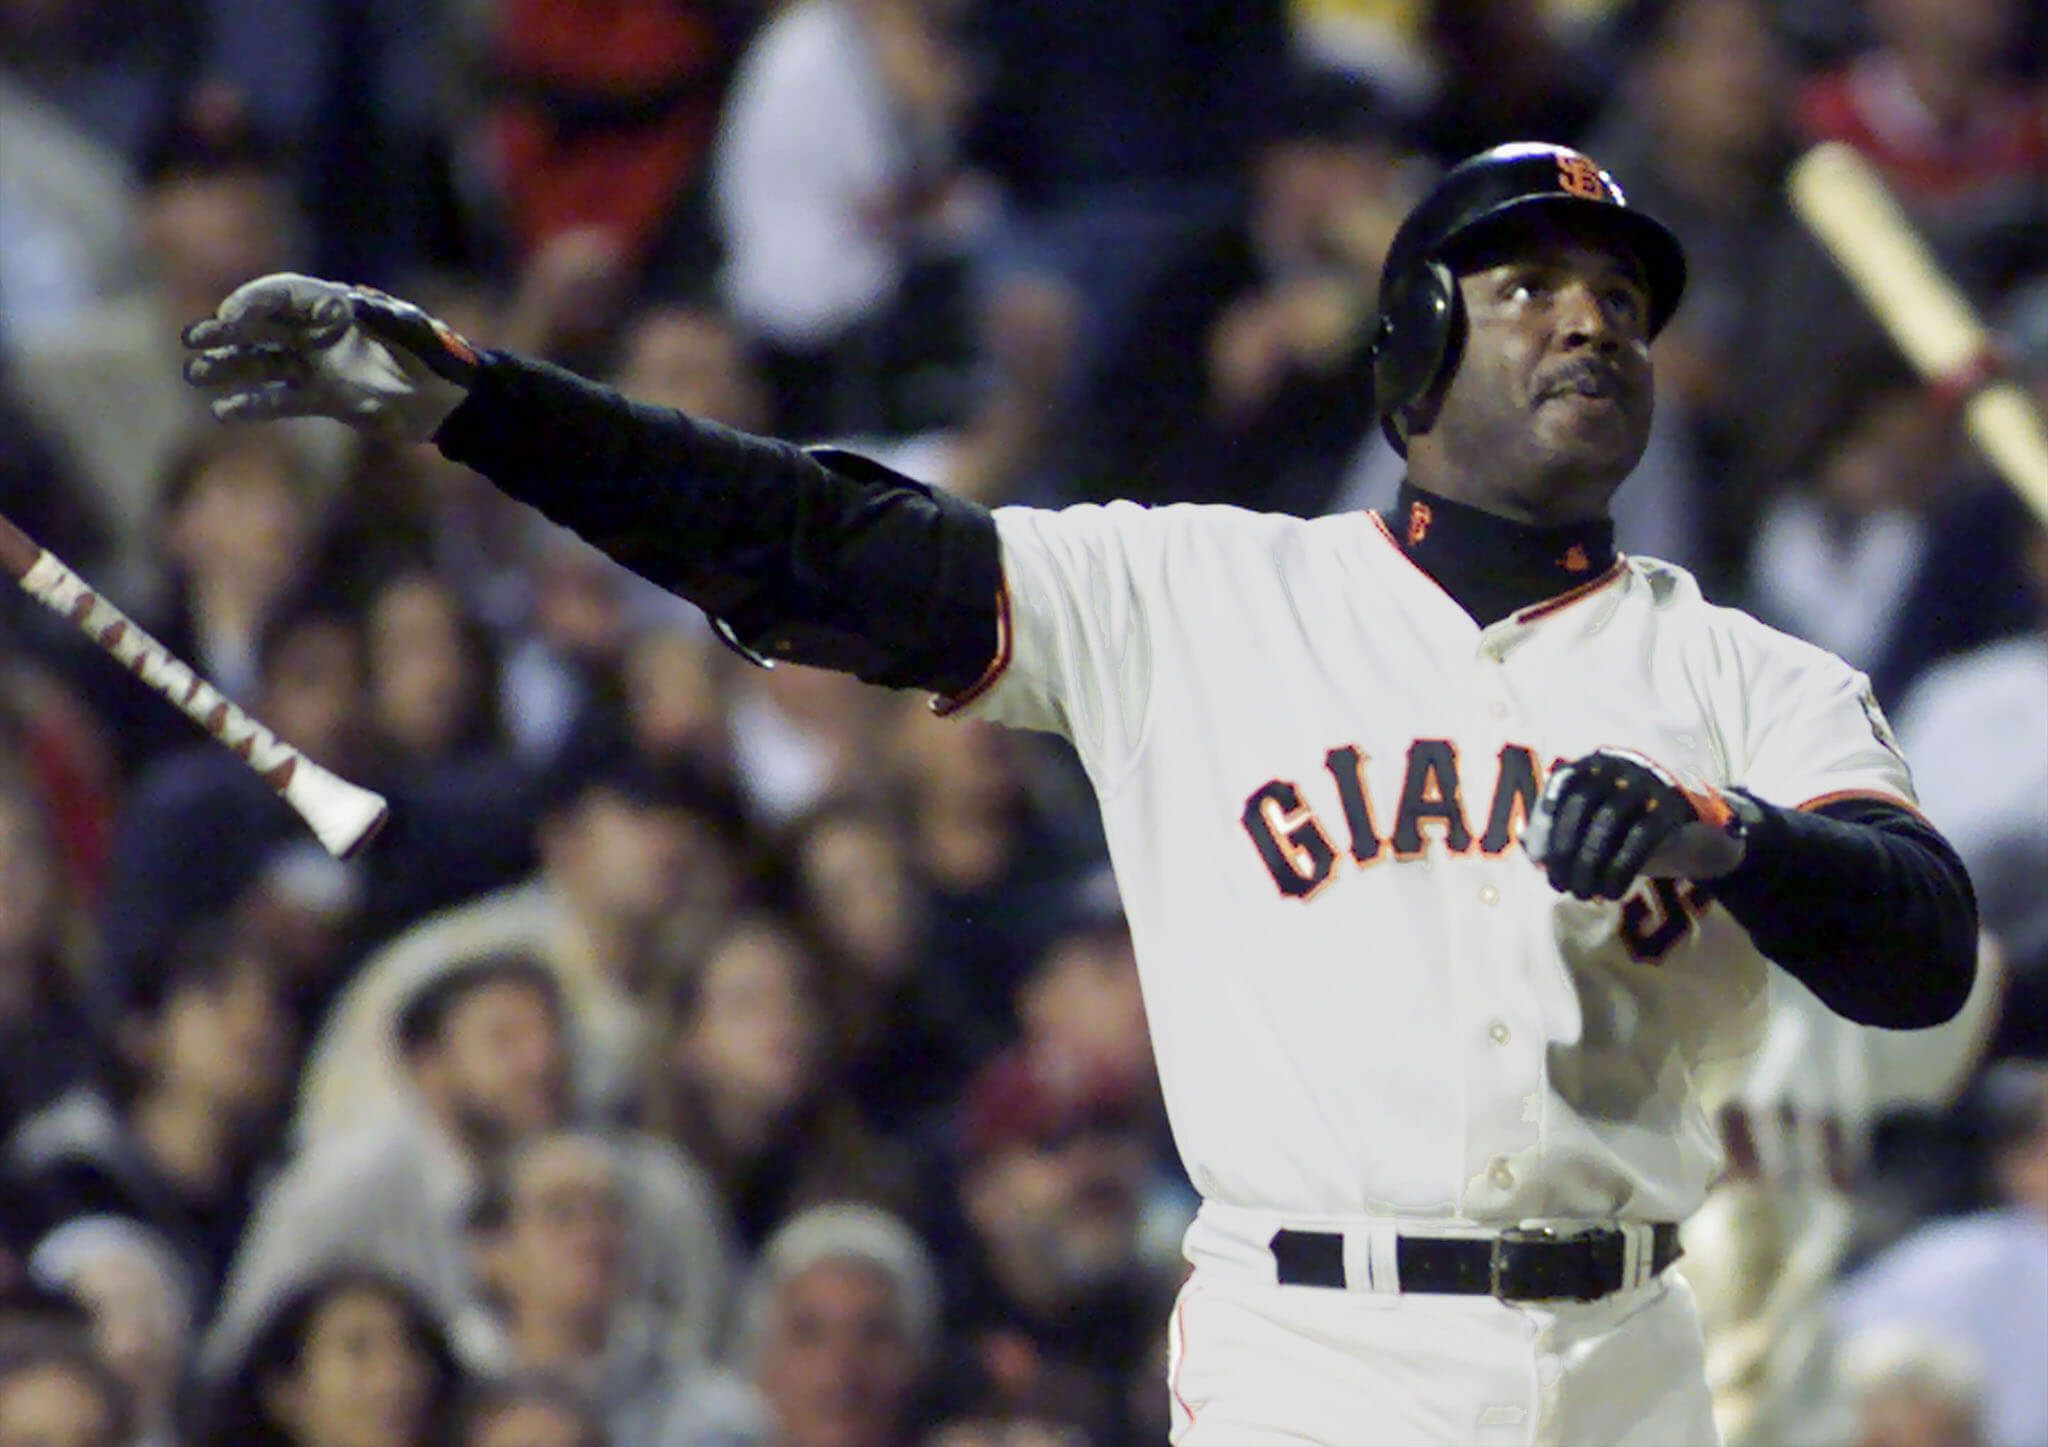 Barry Bonds falls off Hall of Fame ballot, denied by writers for 10th time